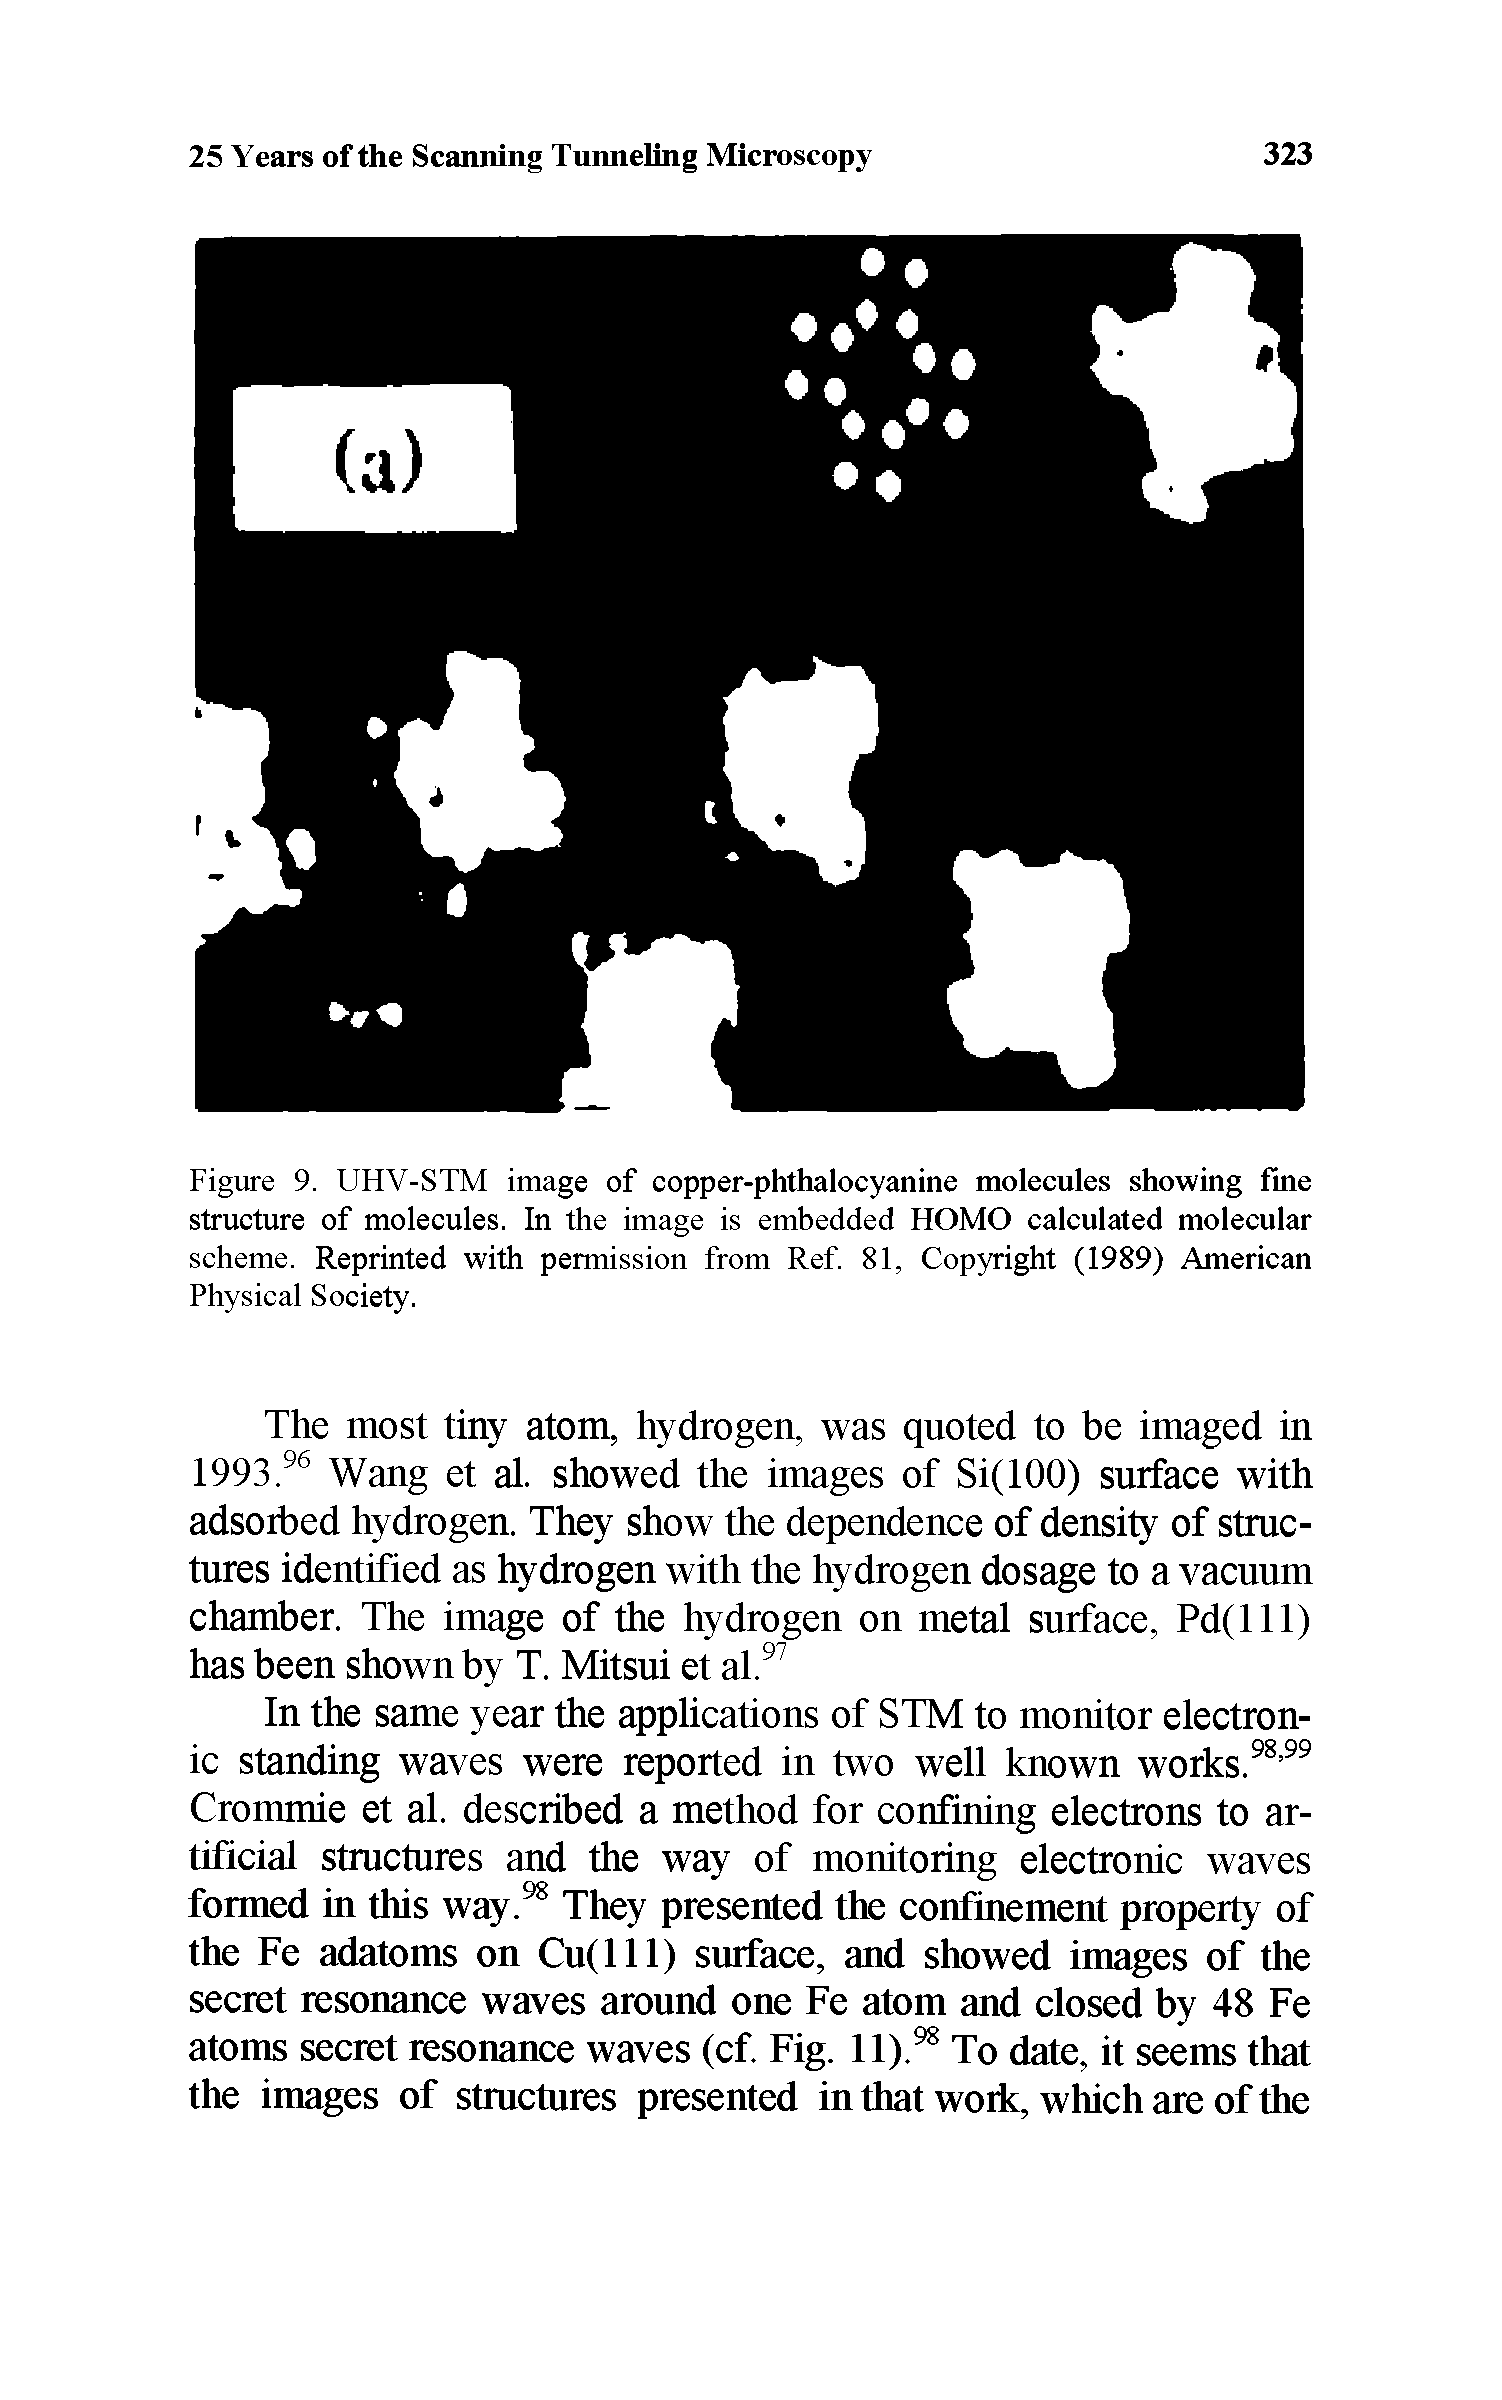 Figure 9. UHV-STM image of copper-phthalocyanine molecules showing fine structure of molecules. In the image is embedded HOMO calculated molecular scheme. Reprinted with permission from Ref. 81, CopxTight (1989) American Physical Society.